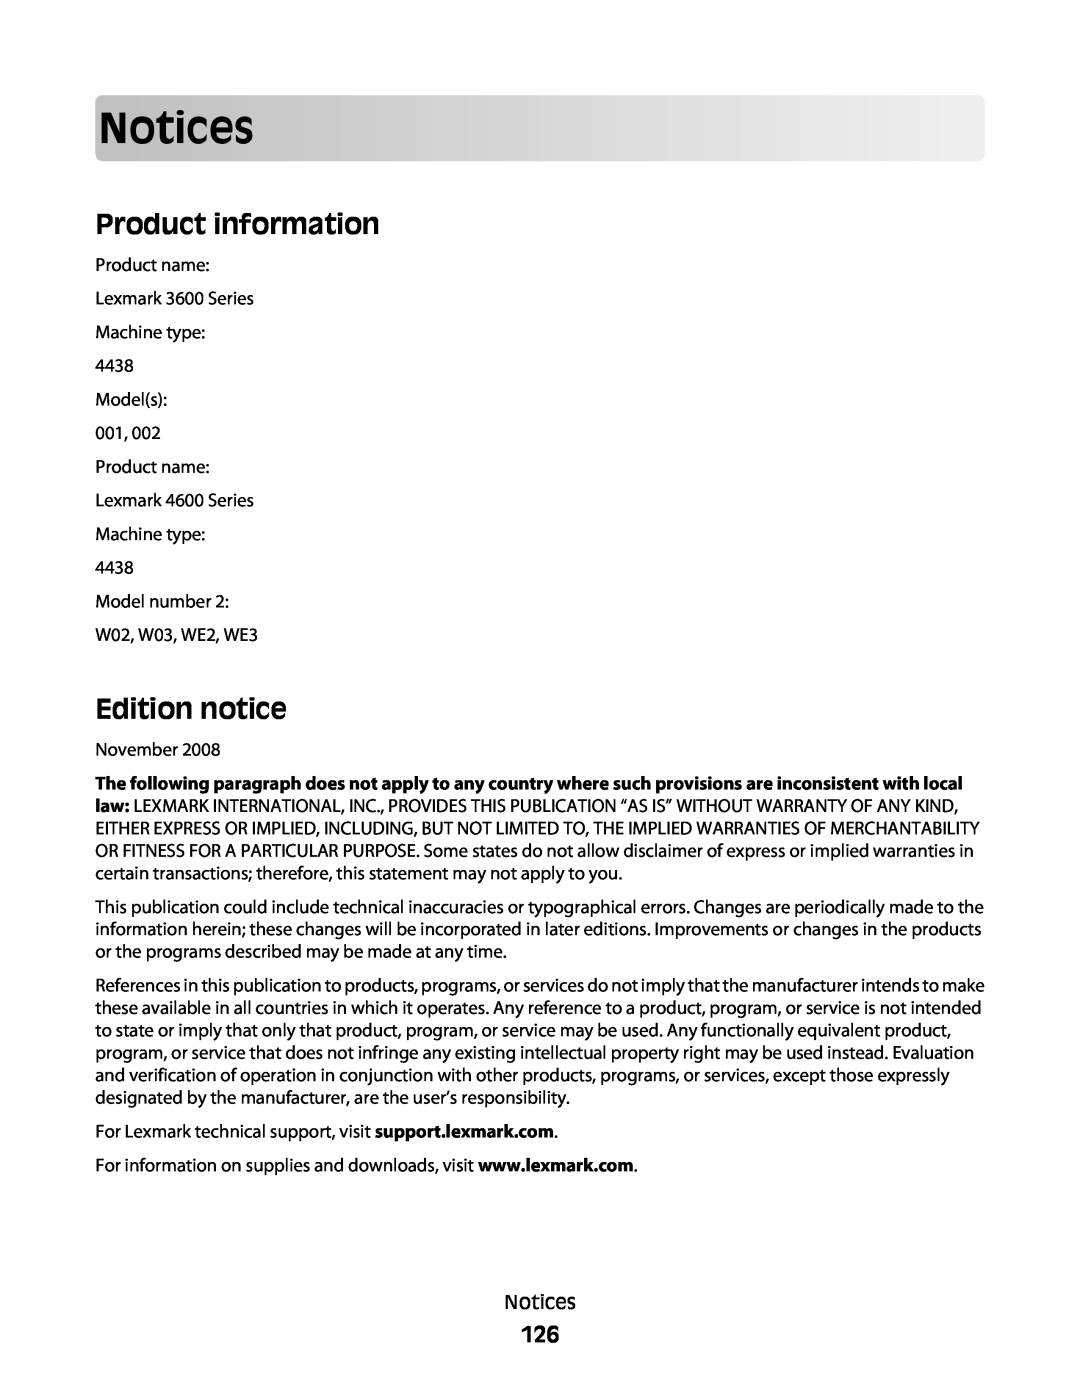 Lexmark 4600, 3600 manual Notices, Product information, Edition notice 